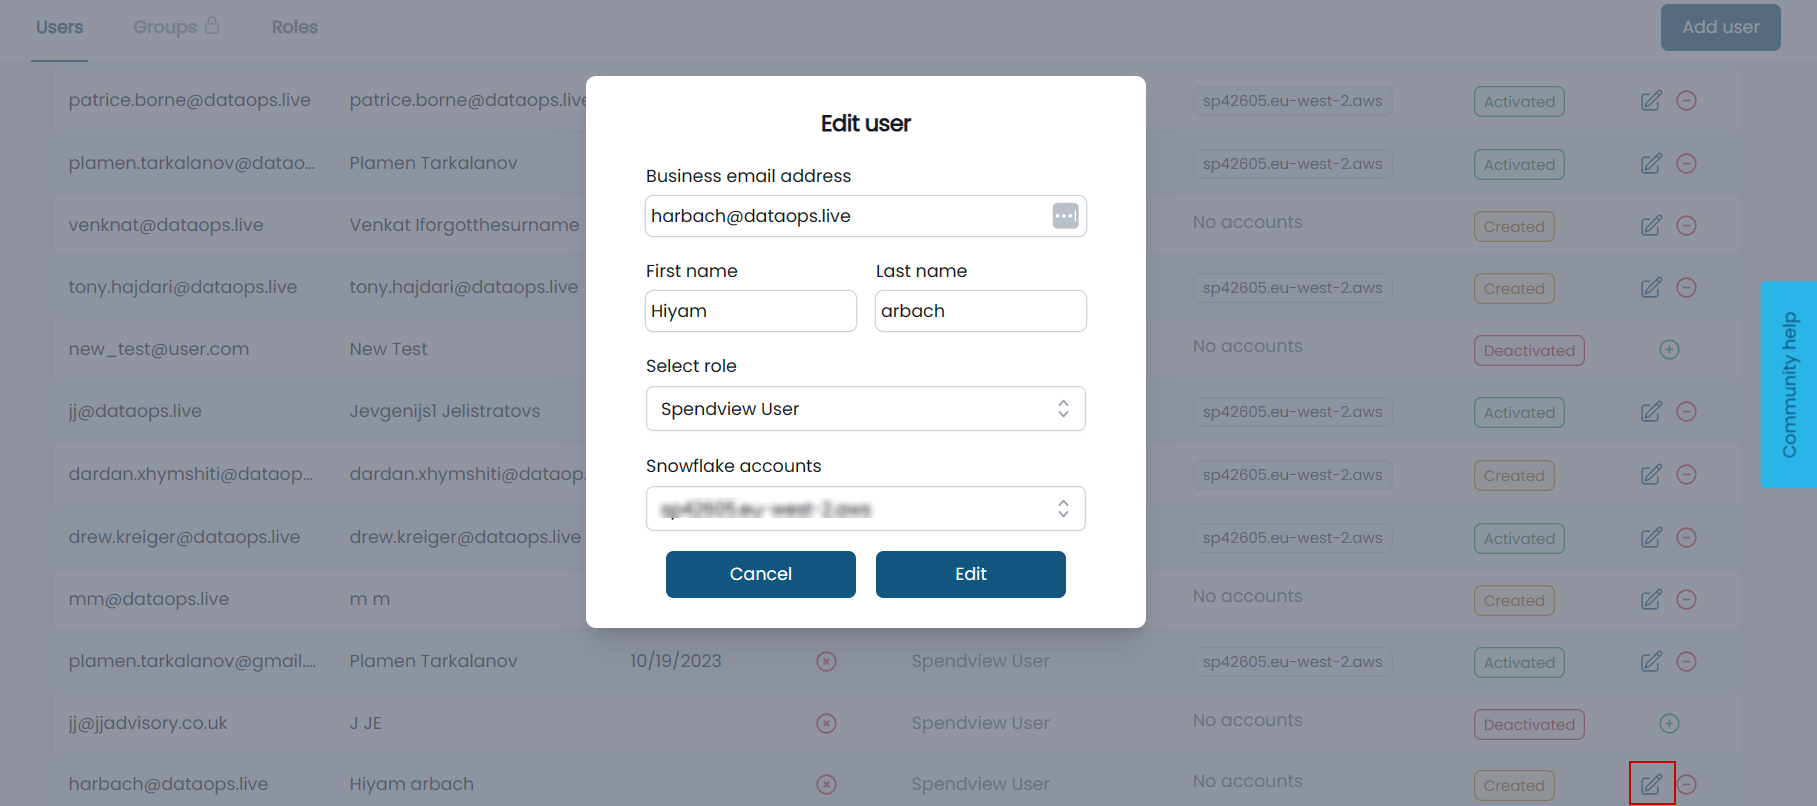 The form to edit user details